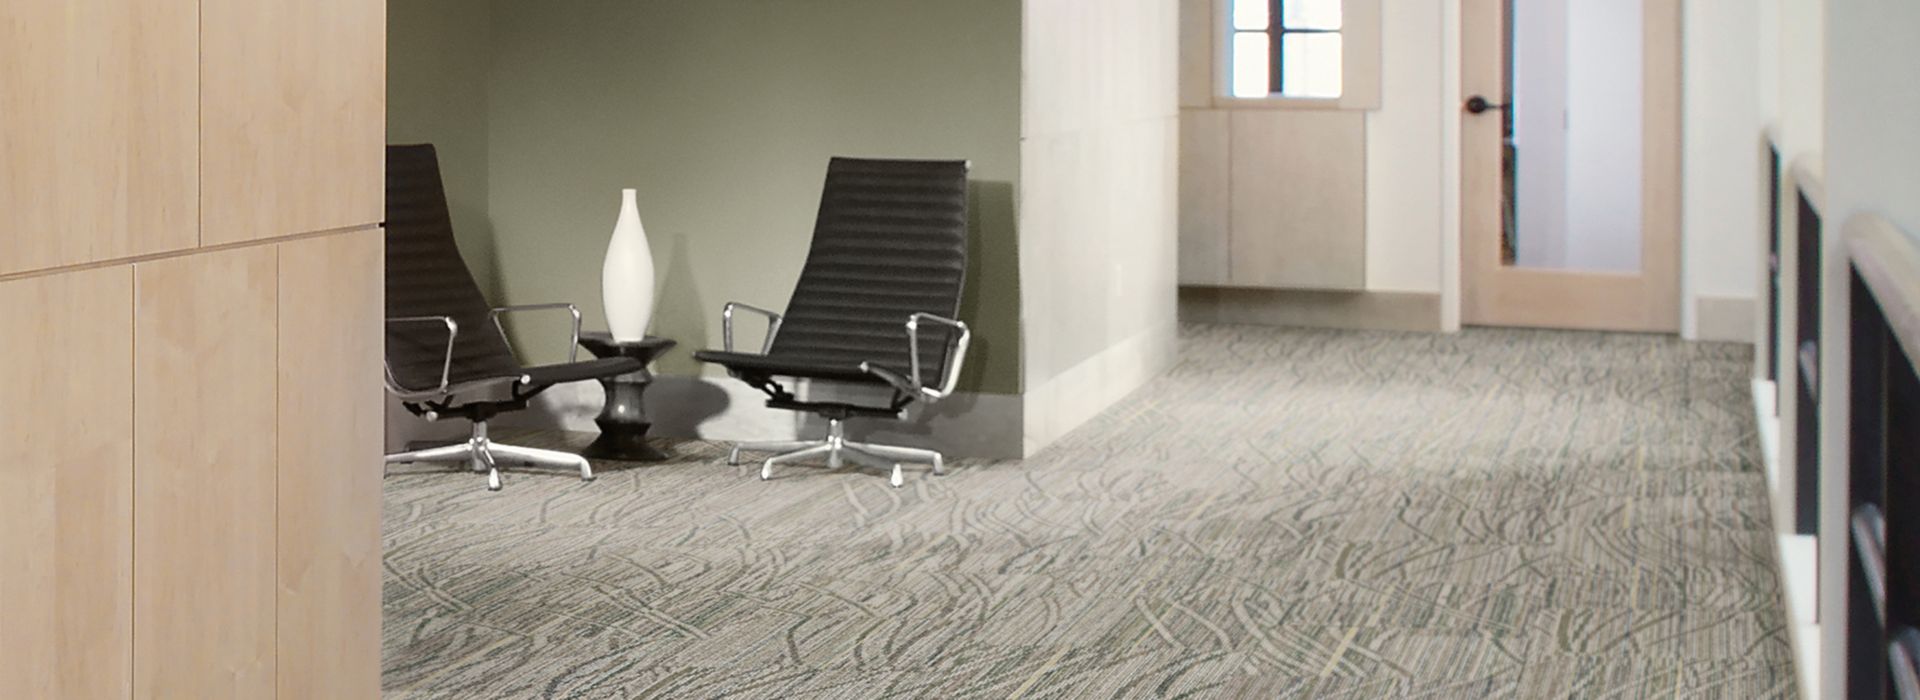 Interface Prairie Grass Loop carpet tile in corridor with seating area on side imagen número 1